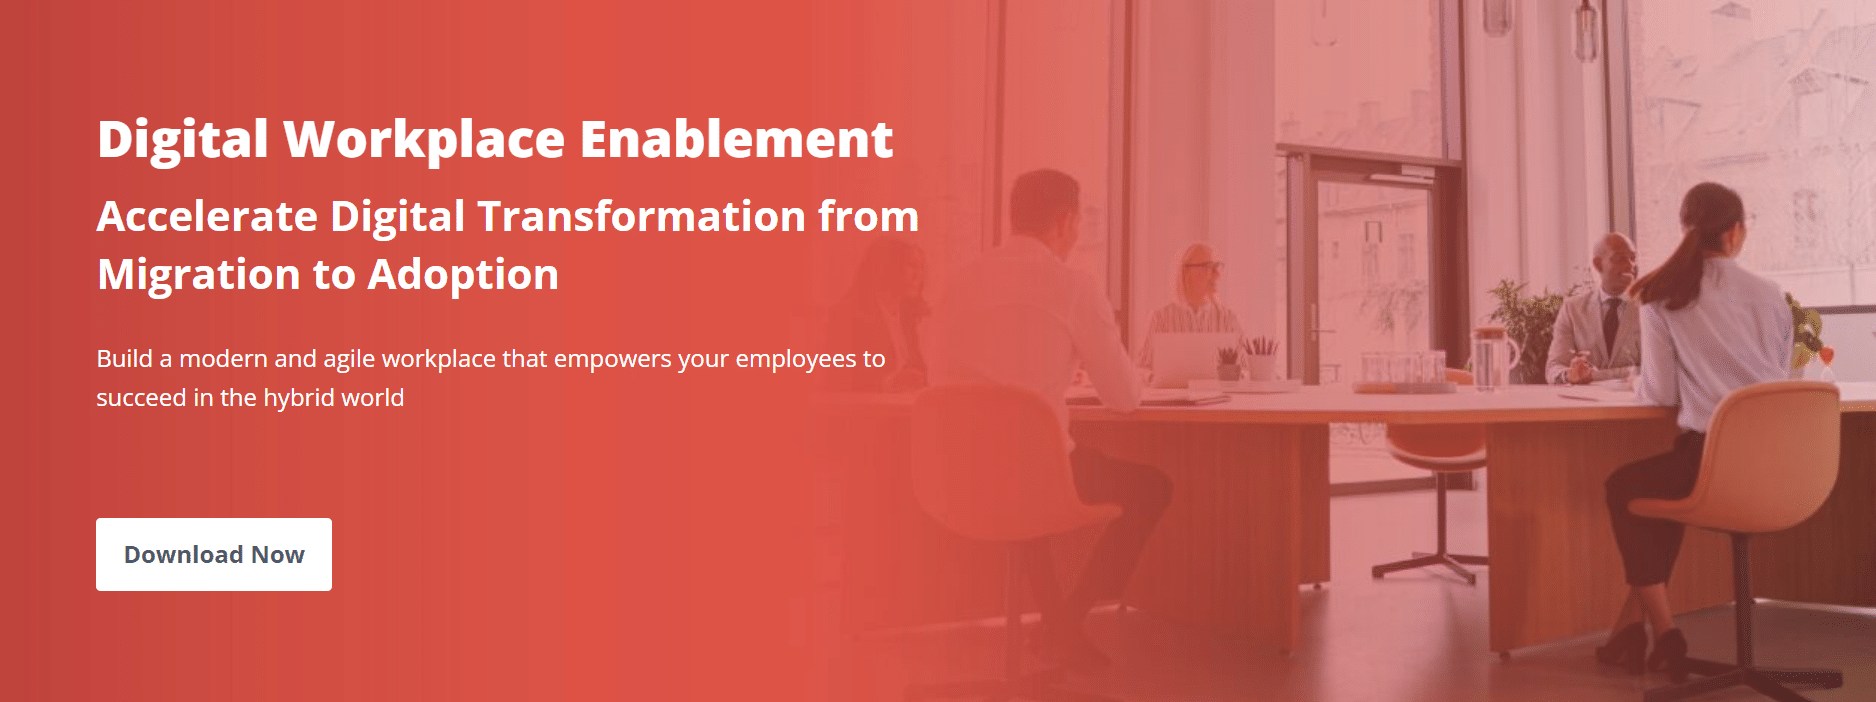 Digital Workplace Enablement Accelerate Transformation Download AvePoint eBook